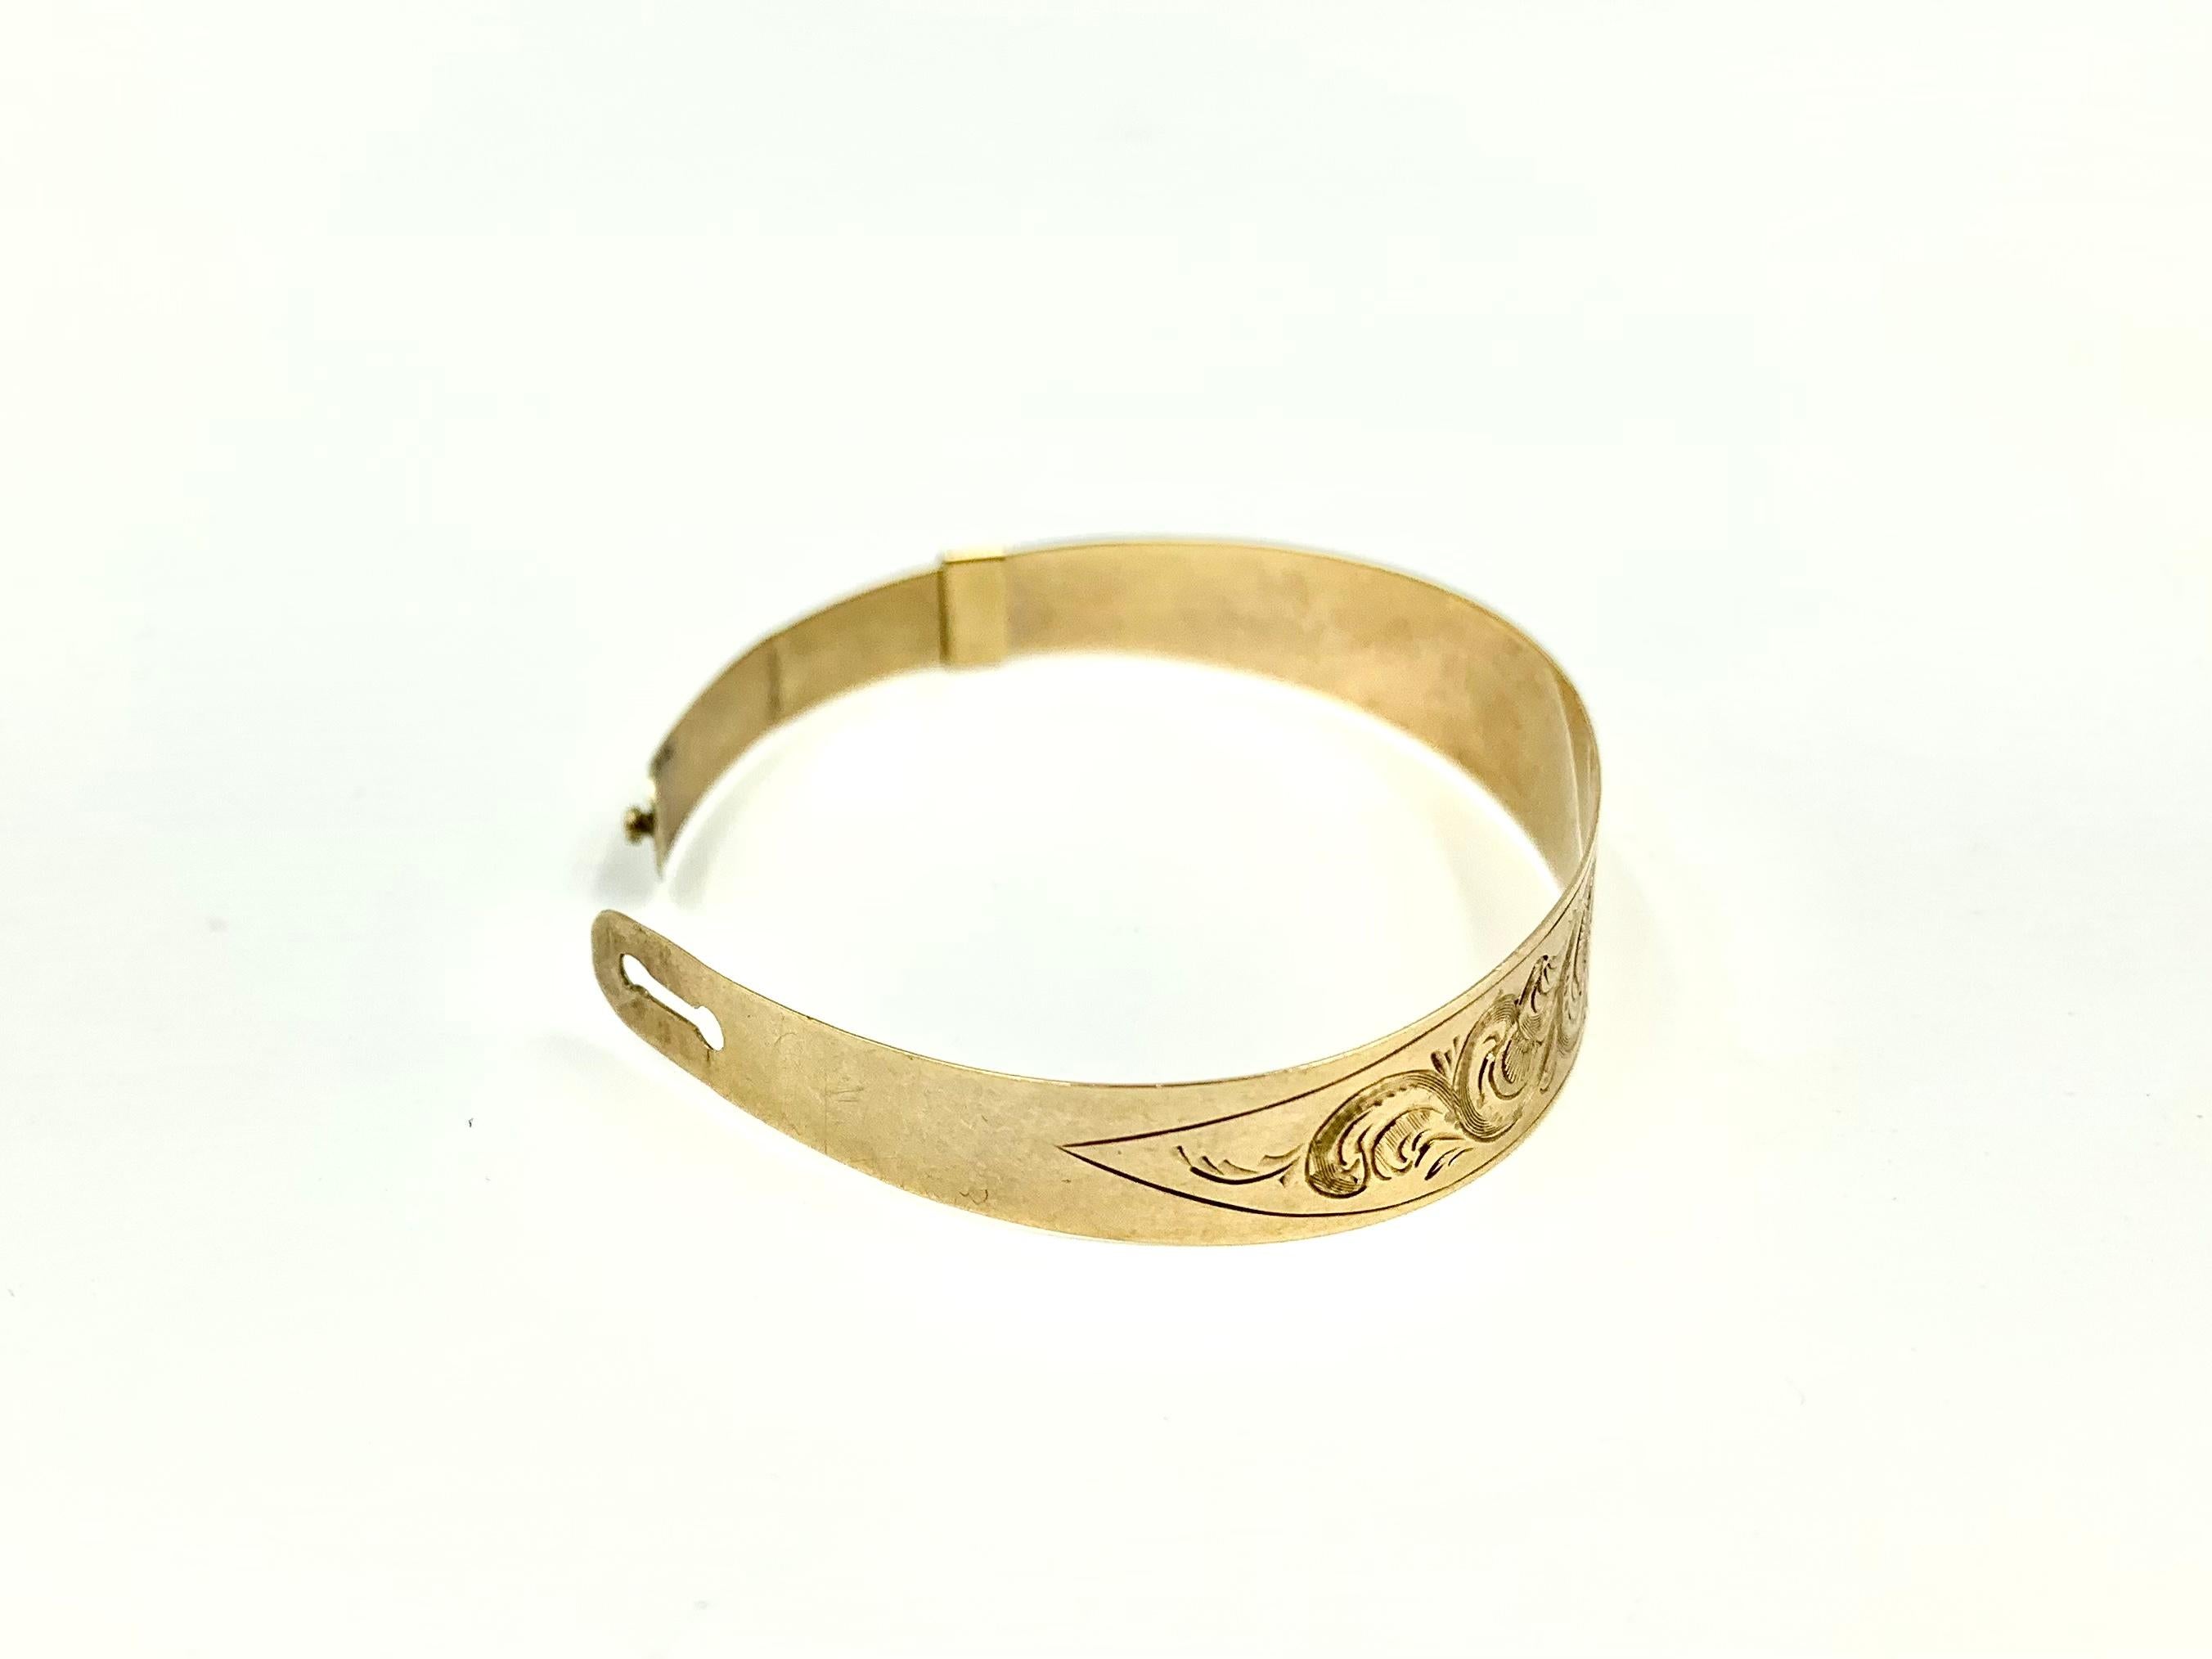 Rare Antique 14K Gold Late Georgian Foliate Scroll Engraved Baby Bracelet In Good Condition For Sale In New York, NY